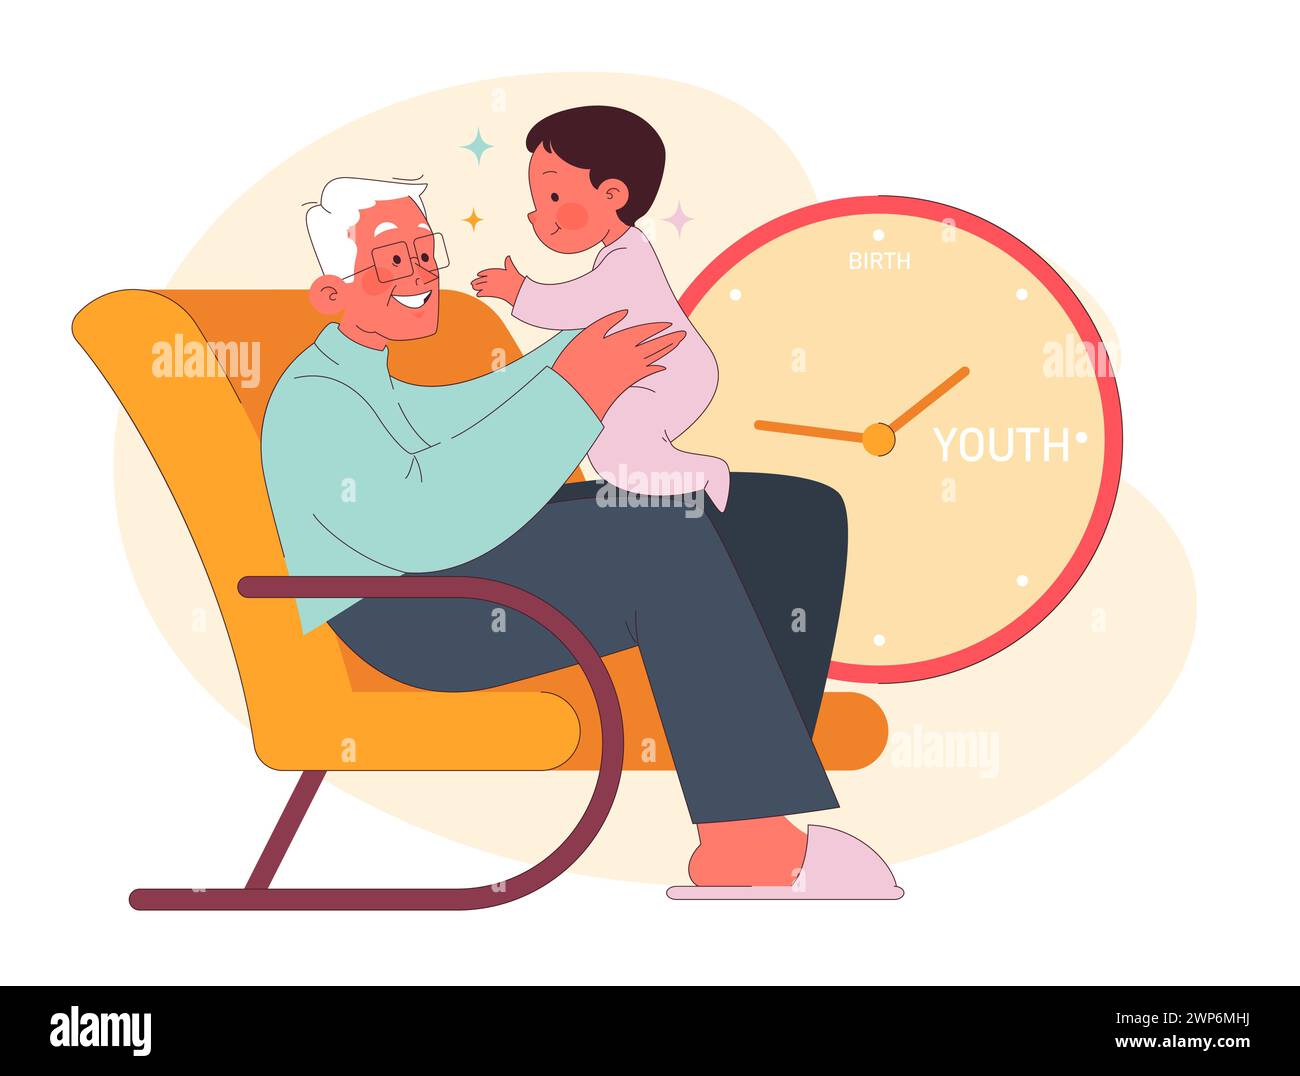 Life Milestones concept. A joyful grandfather holds a giggling baby, celebrating birth and youth moments, amidst a backdrop of a symbolic clock. Time's cherished milestones in vibrant colors. Stock Vector